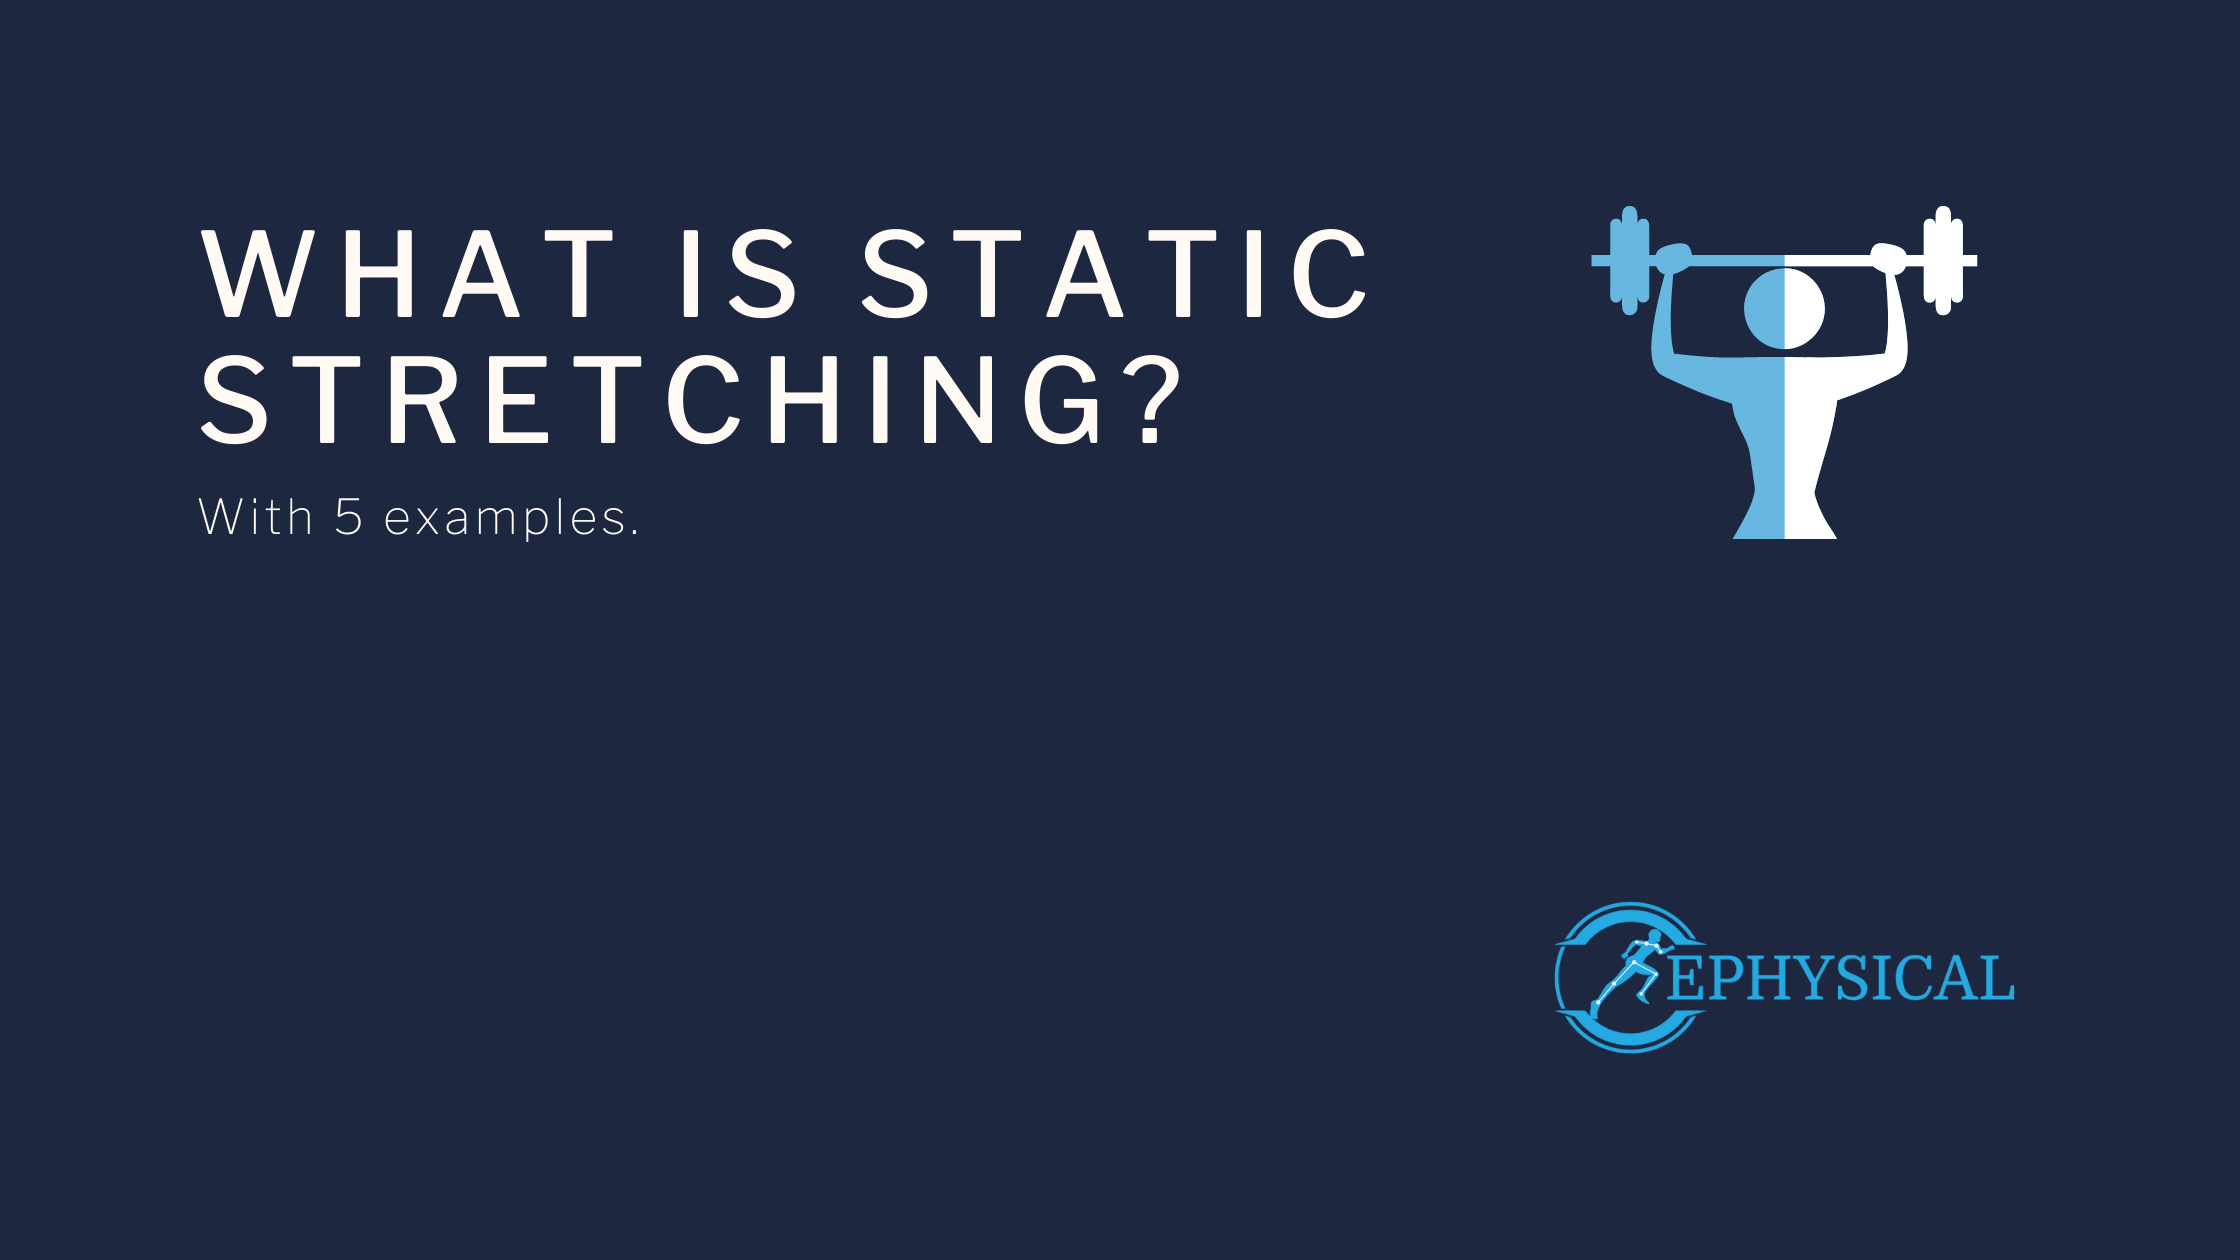 What is static stretching ephysical